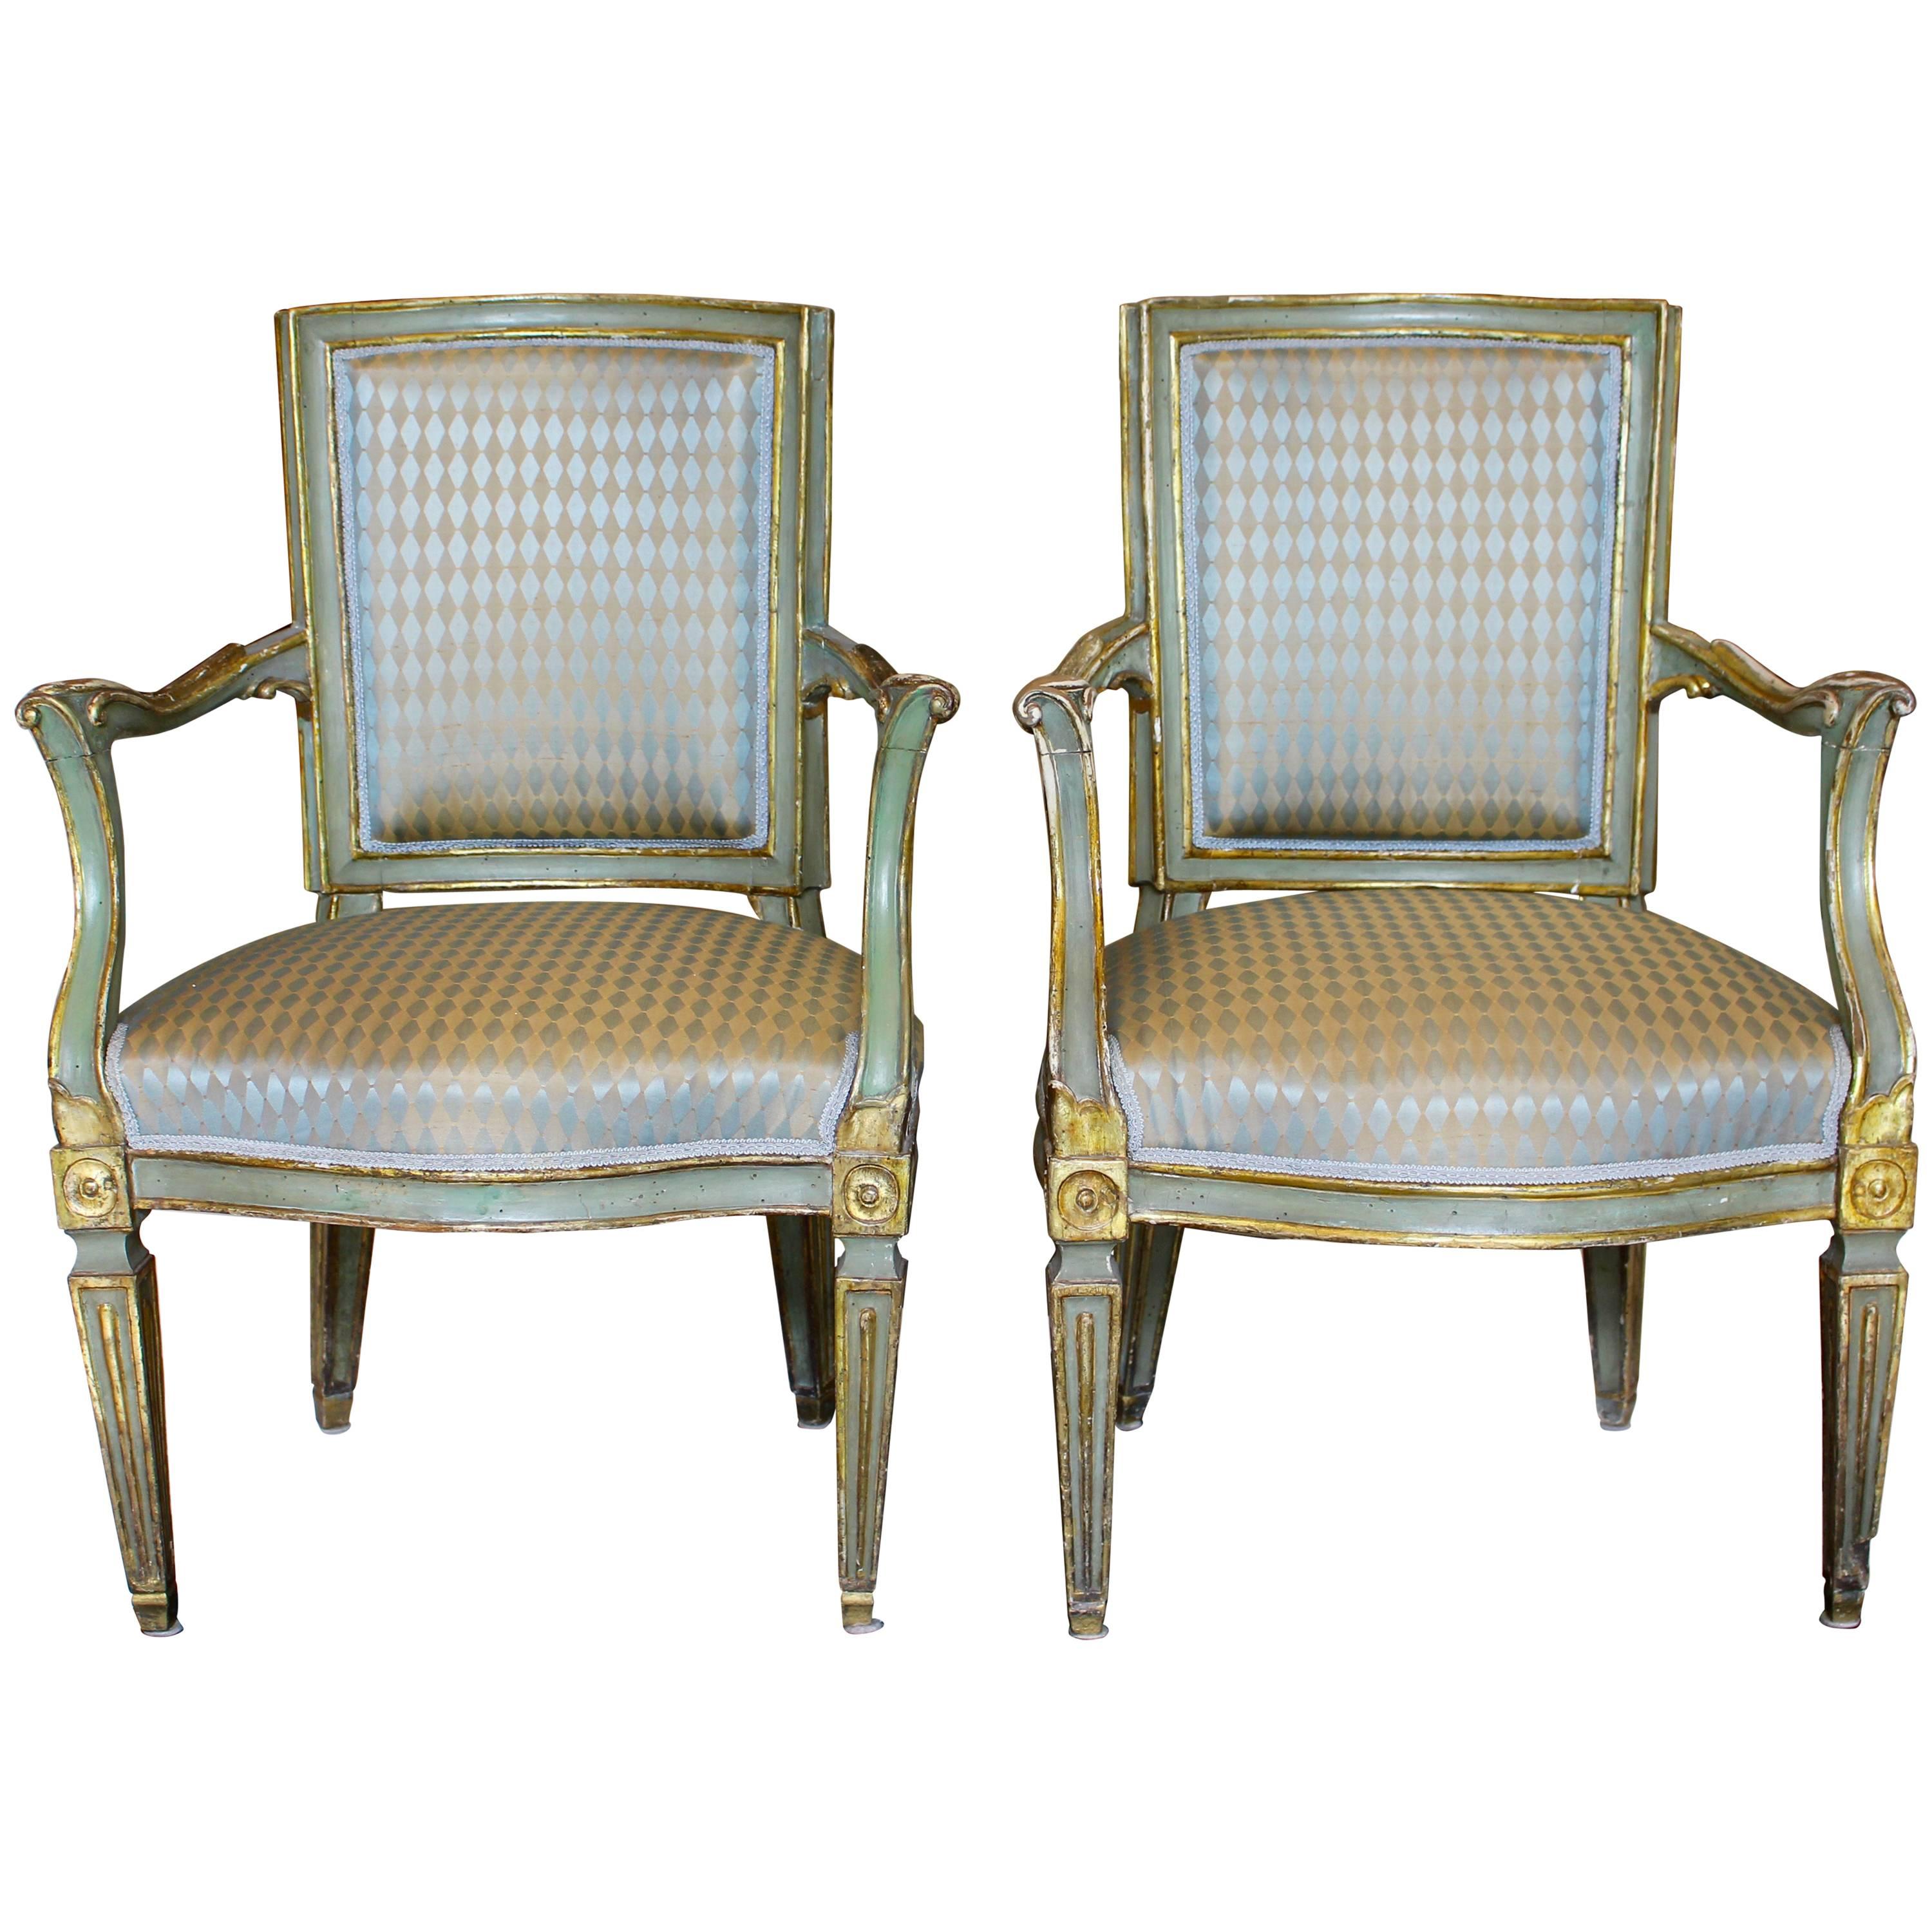 Pair of Italian 18th Century Neoclassical Painted and Parcel-Gilt Armchairs For Sale